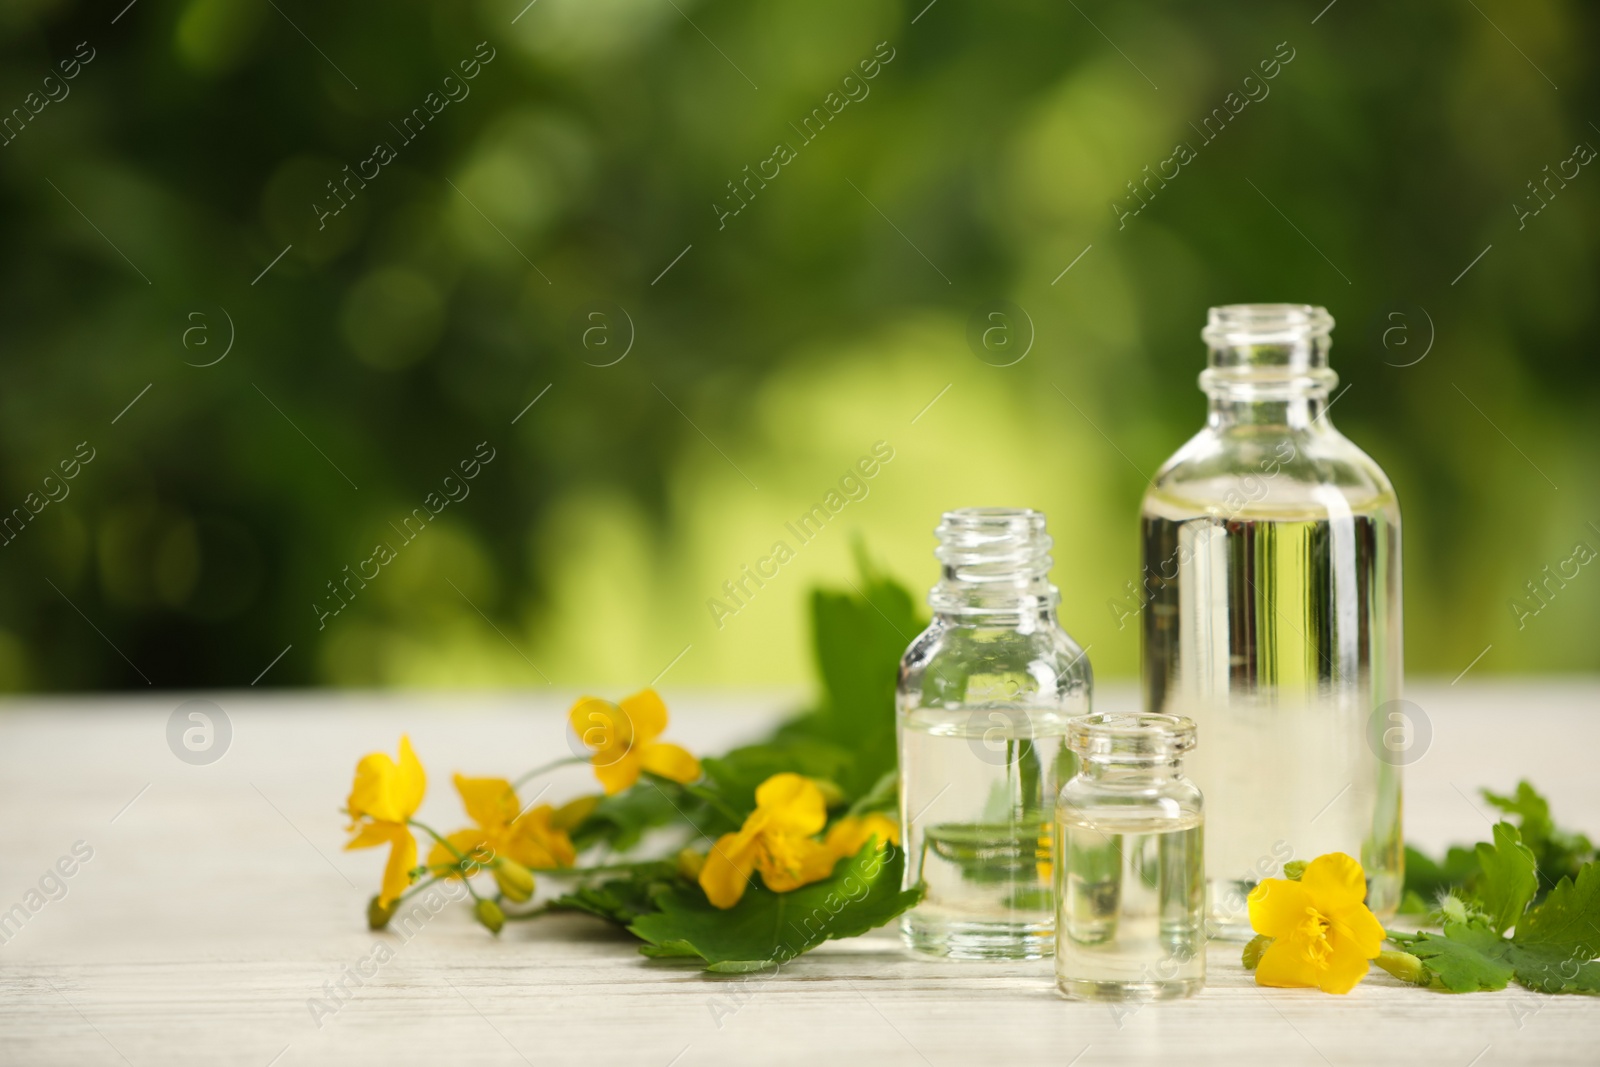 Photo of Bottles of natural celandine oil near flowers on white wooden table outdoors, space for text